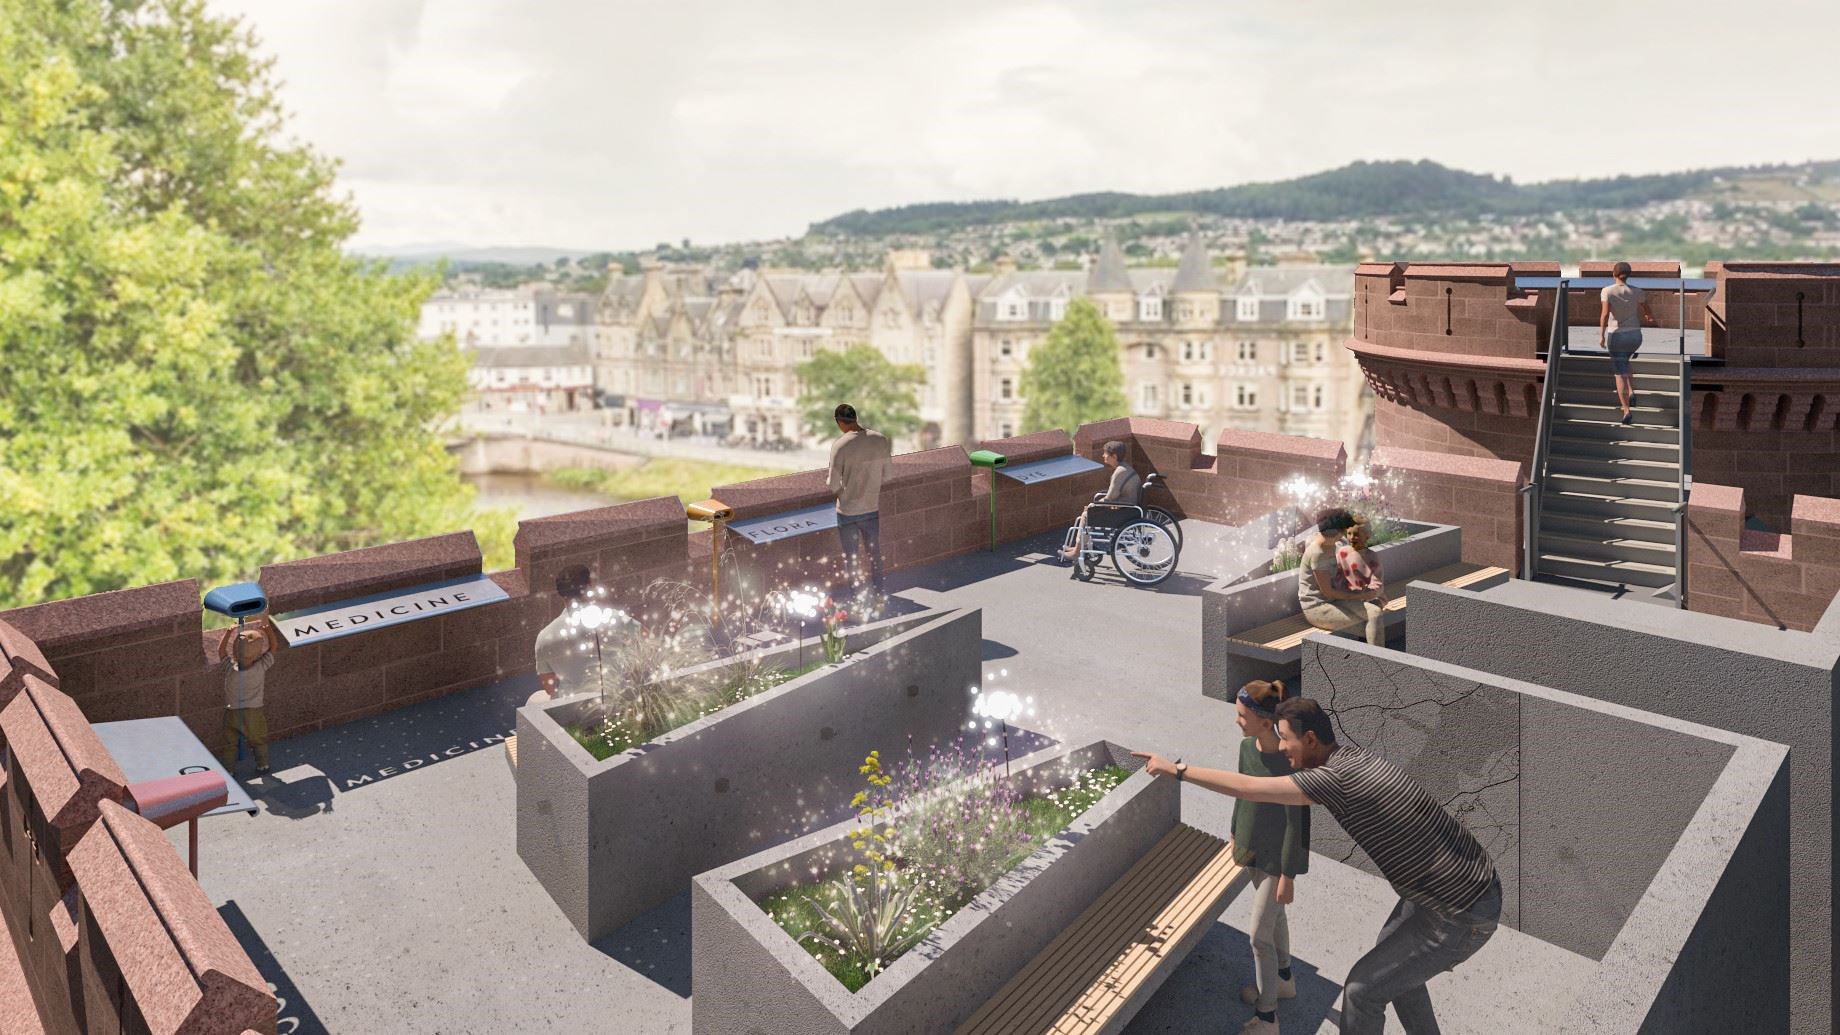 The roof terrace offers new ways of looking across the Castle garden, with stories hidden within the planters to be triggered by the interactive device.